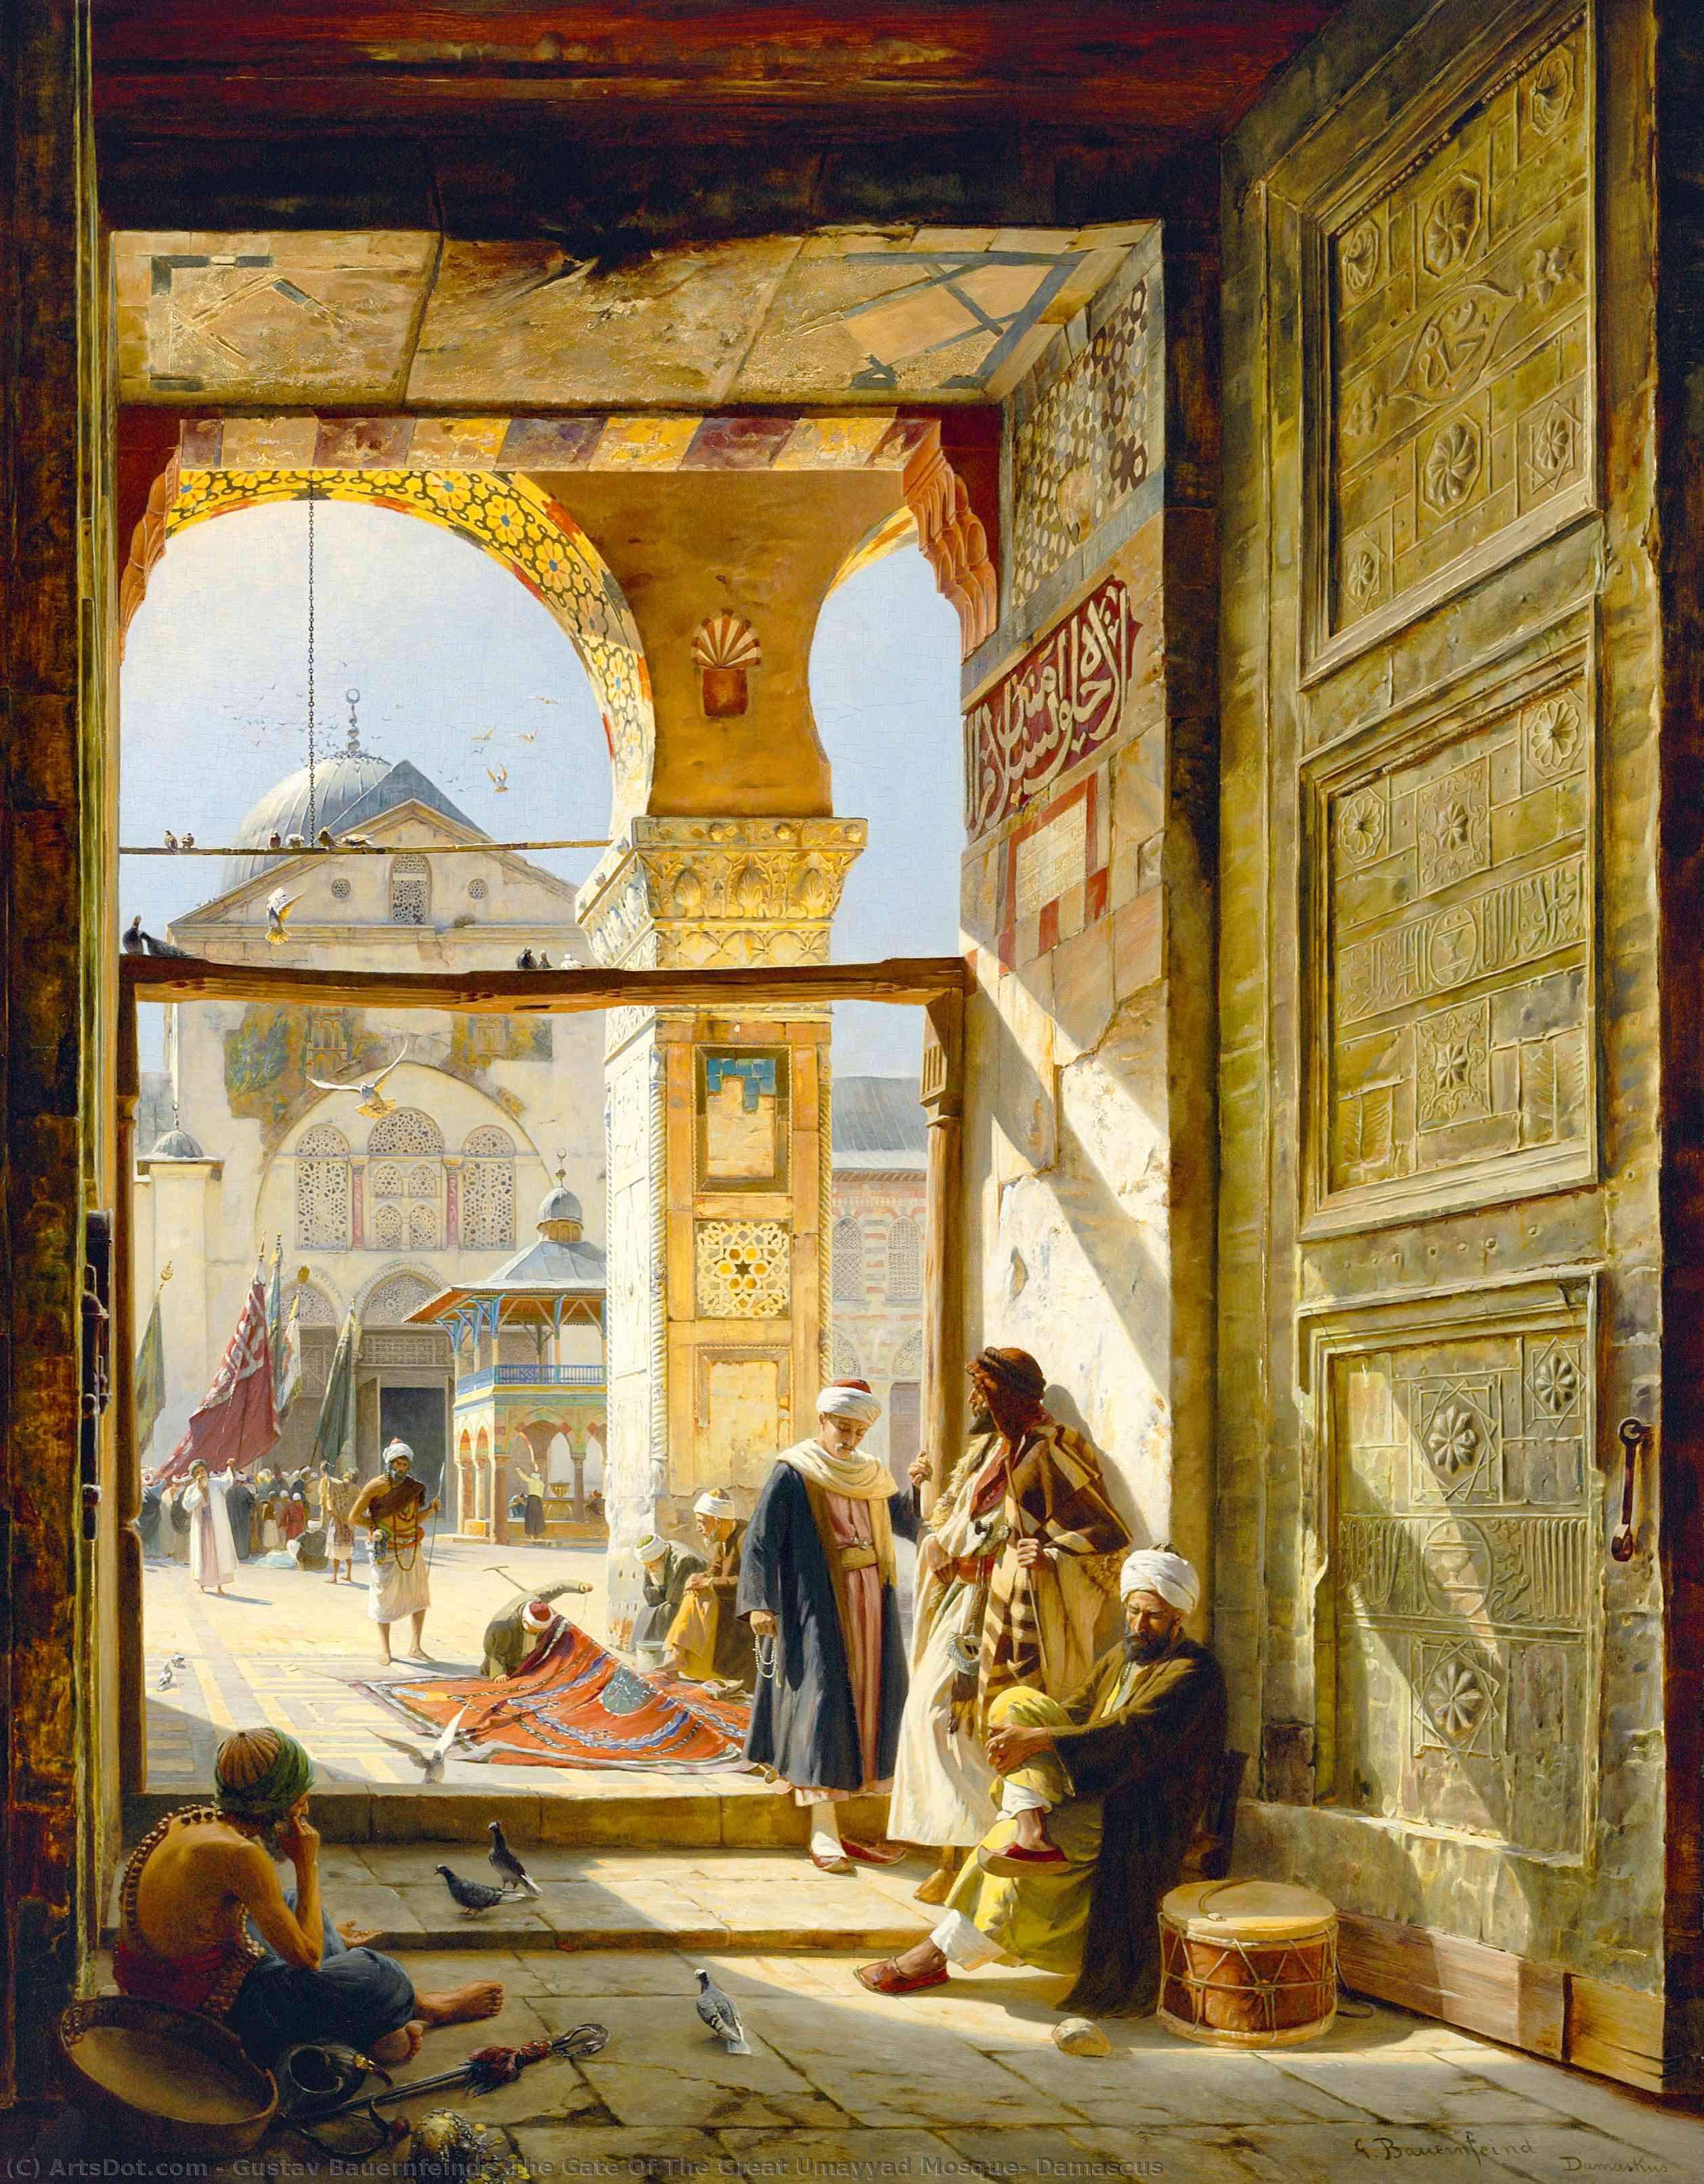 Buy Museum Art Reproductions The Gate Of The Great Umayyad Mosque, Damascus by Gustav Bauernfeind (1848-1904, Germany) | ArtsDot.com